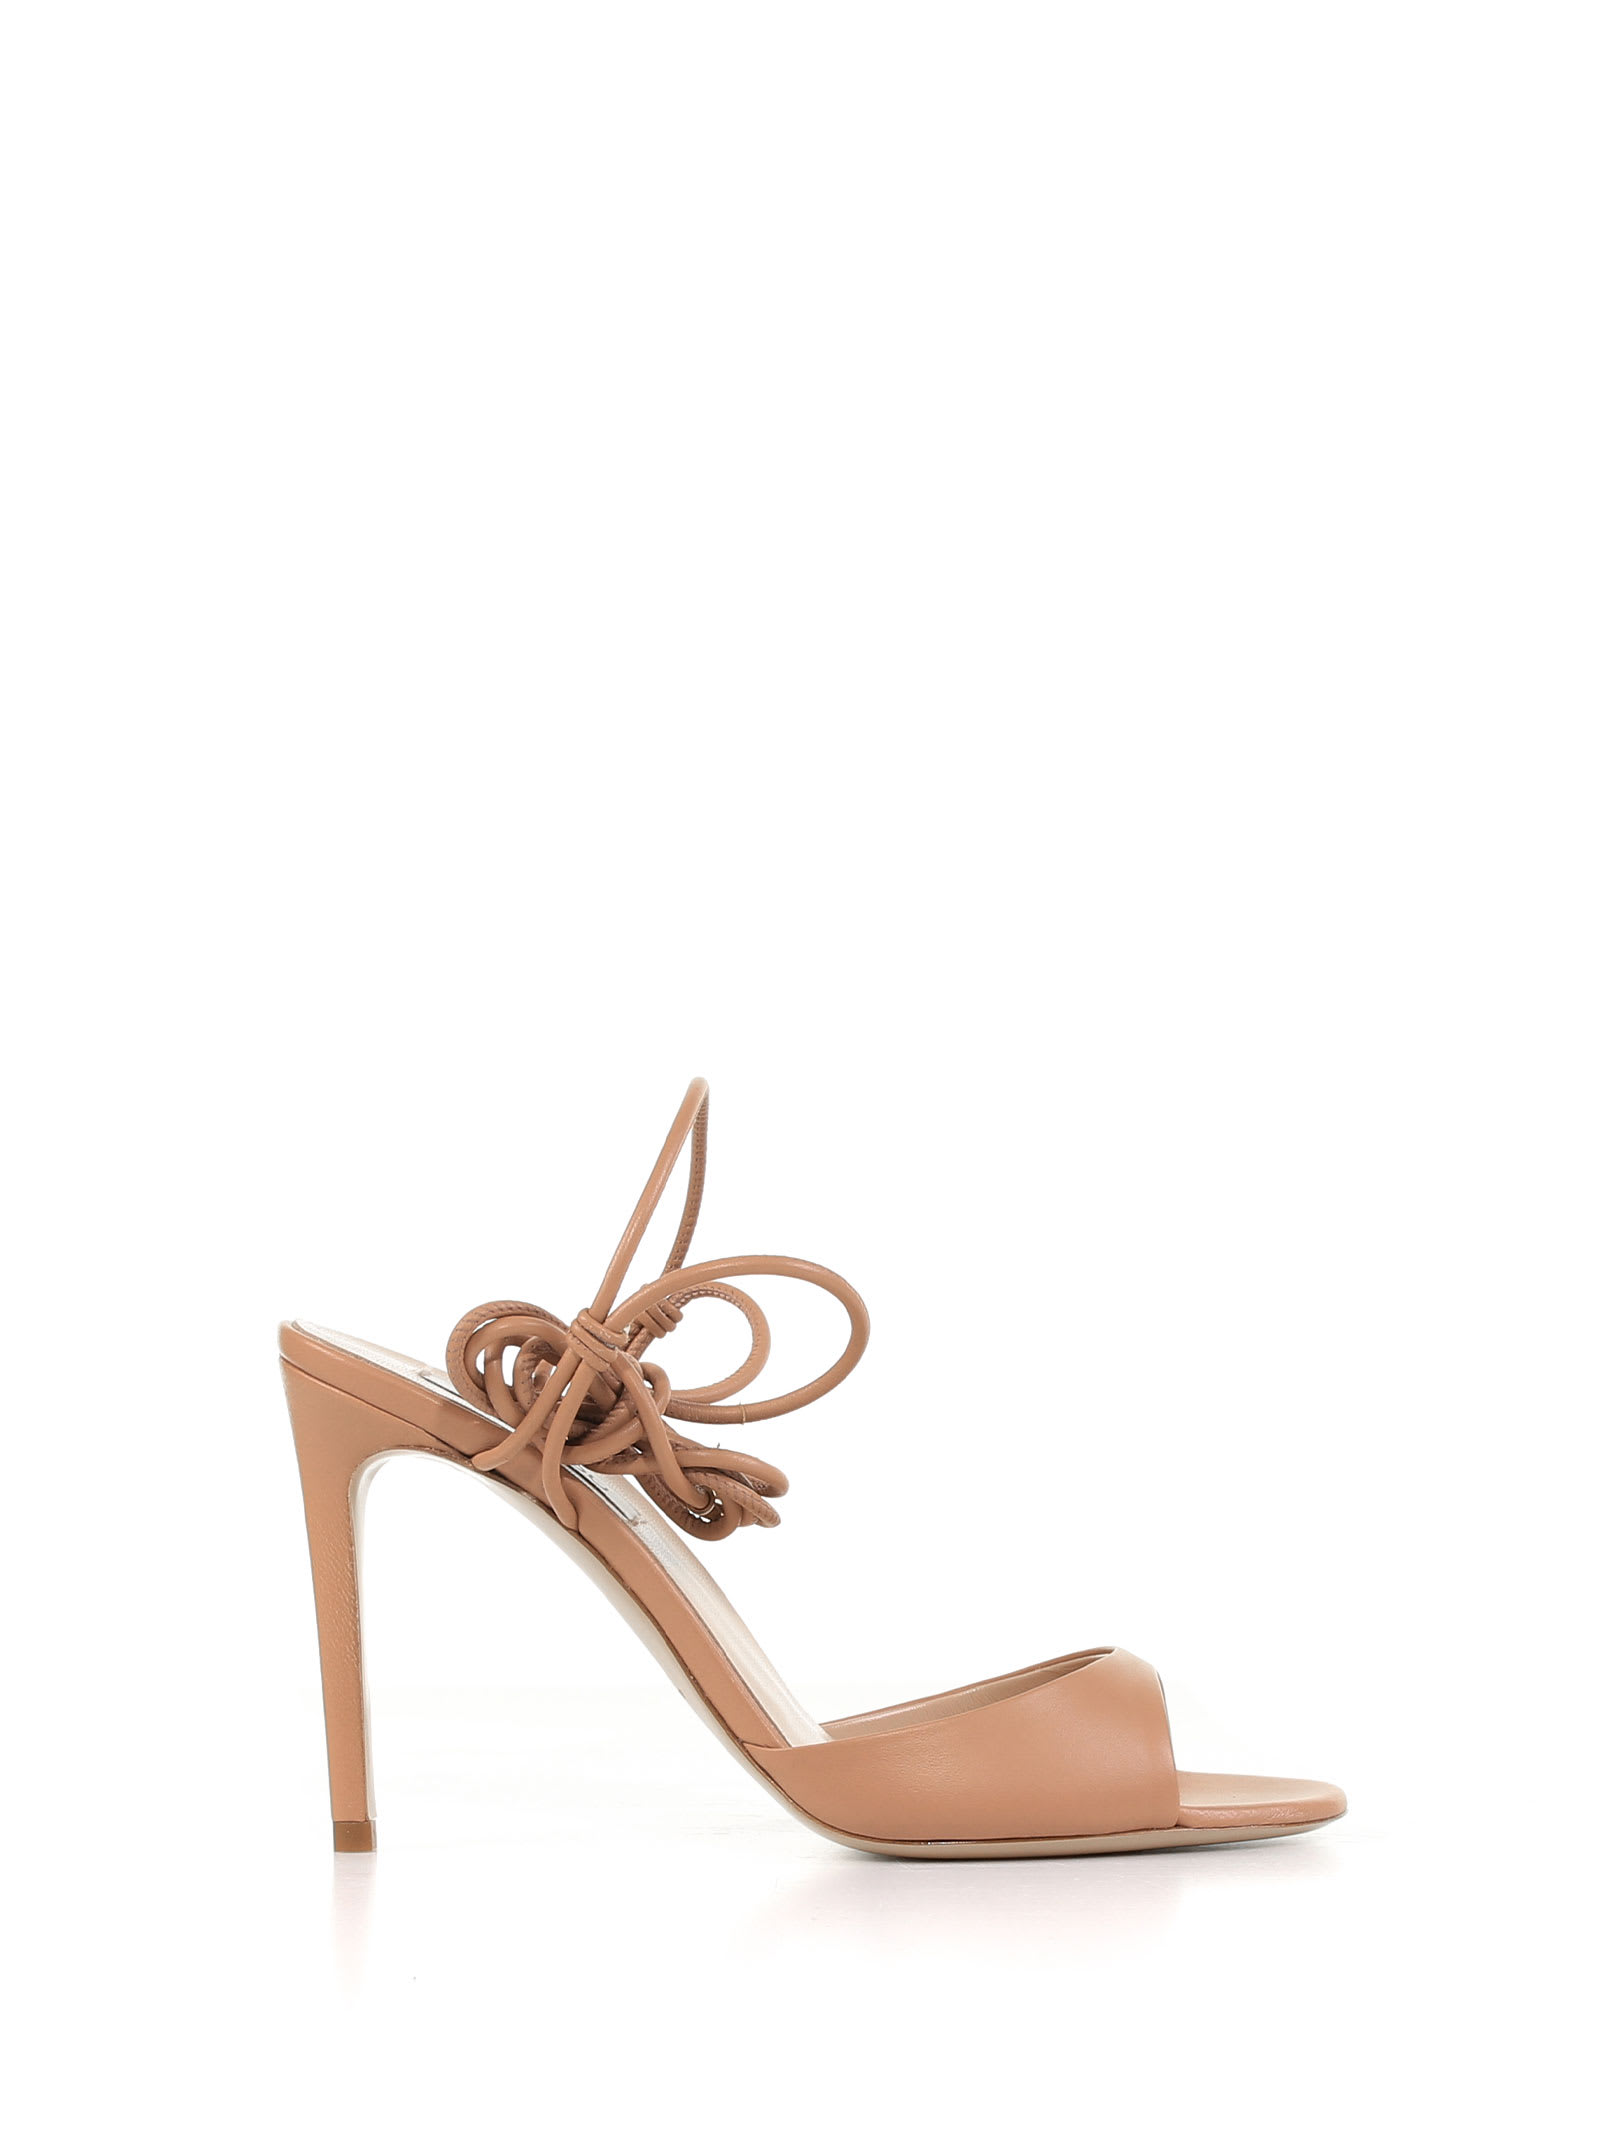 Ninalilou Sandal In Nappa Leather With Ankle Strap